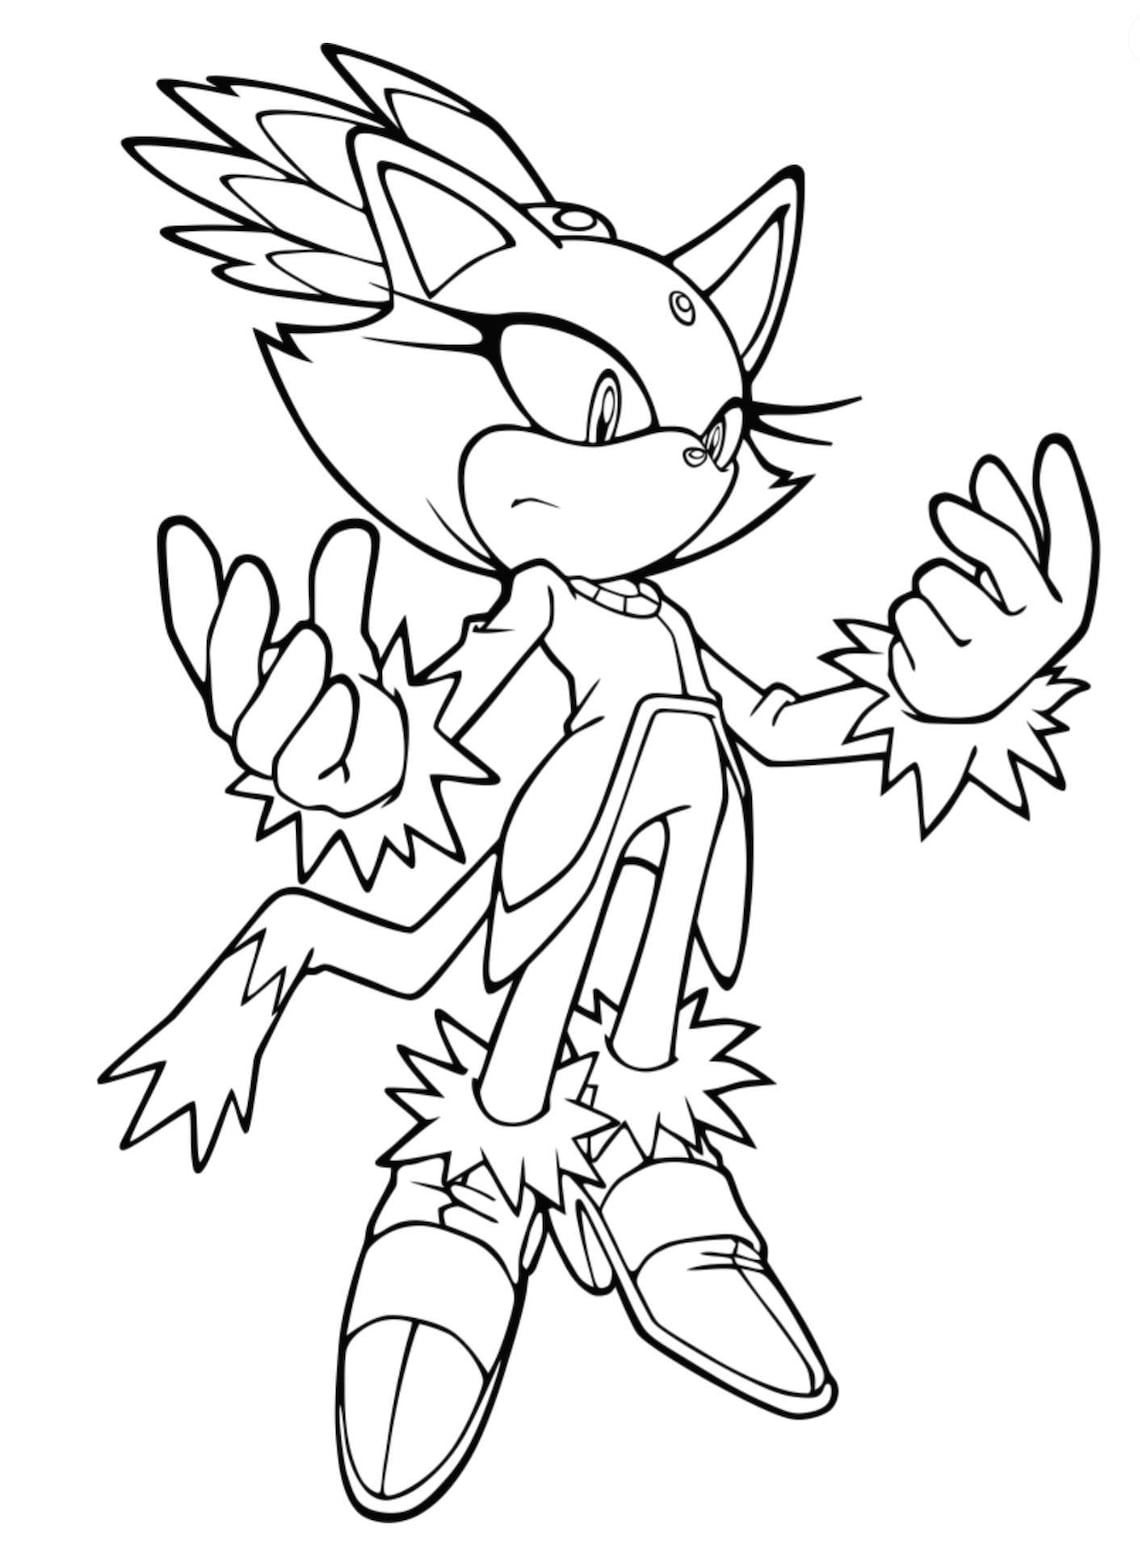 Sonic Coloring Pages 104 Pictures digital Download - Etsy Canada